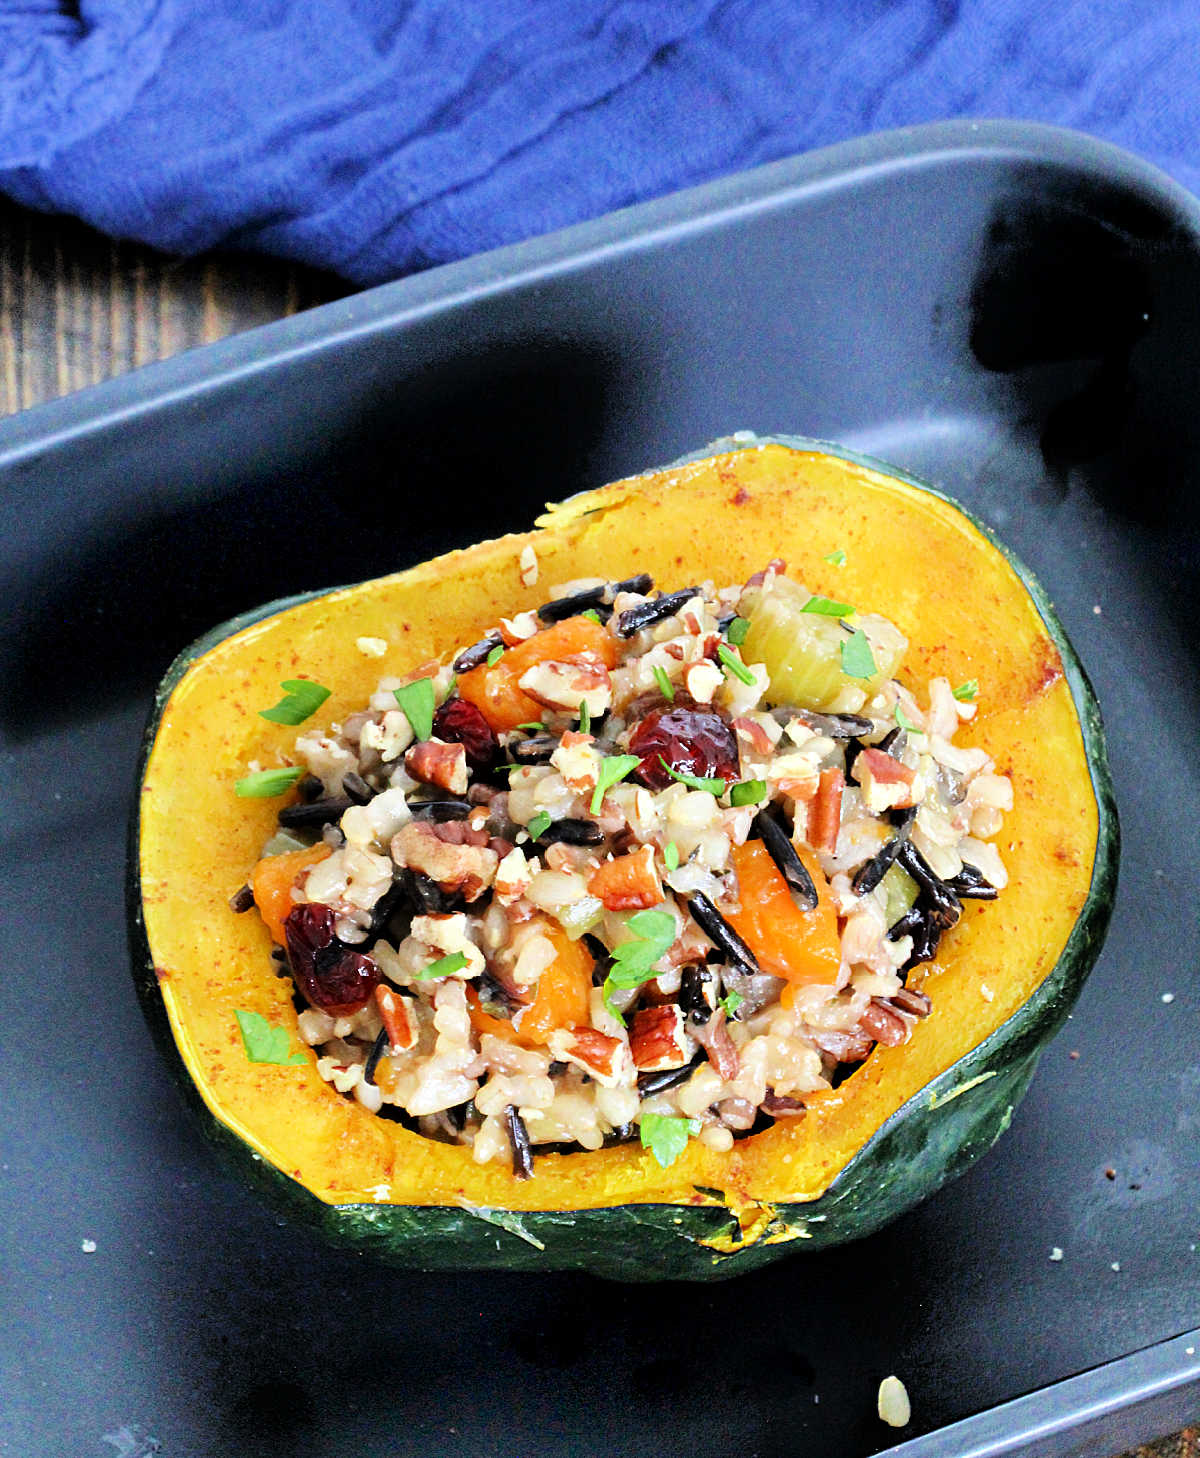 Microwaved acorn squash stuffed with wild rice pilaf in a black baking dish.